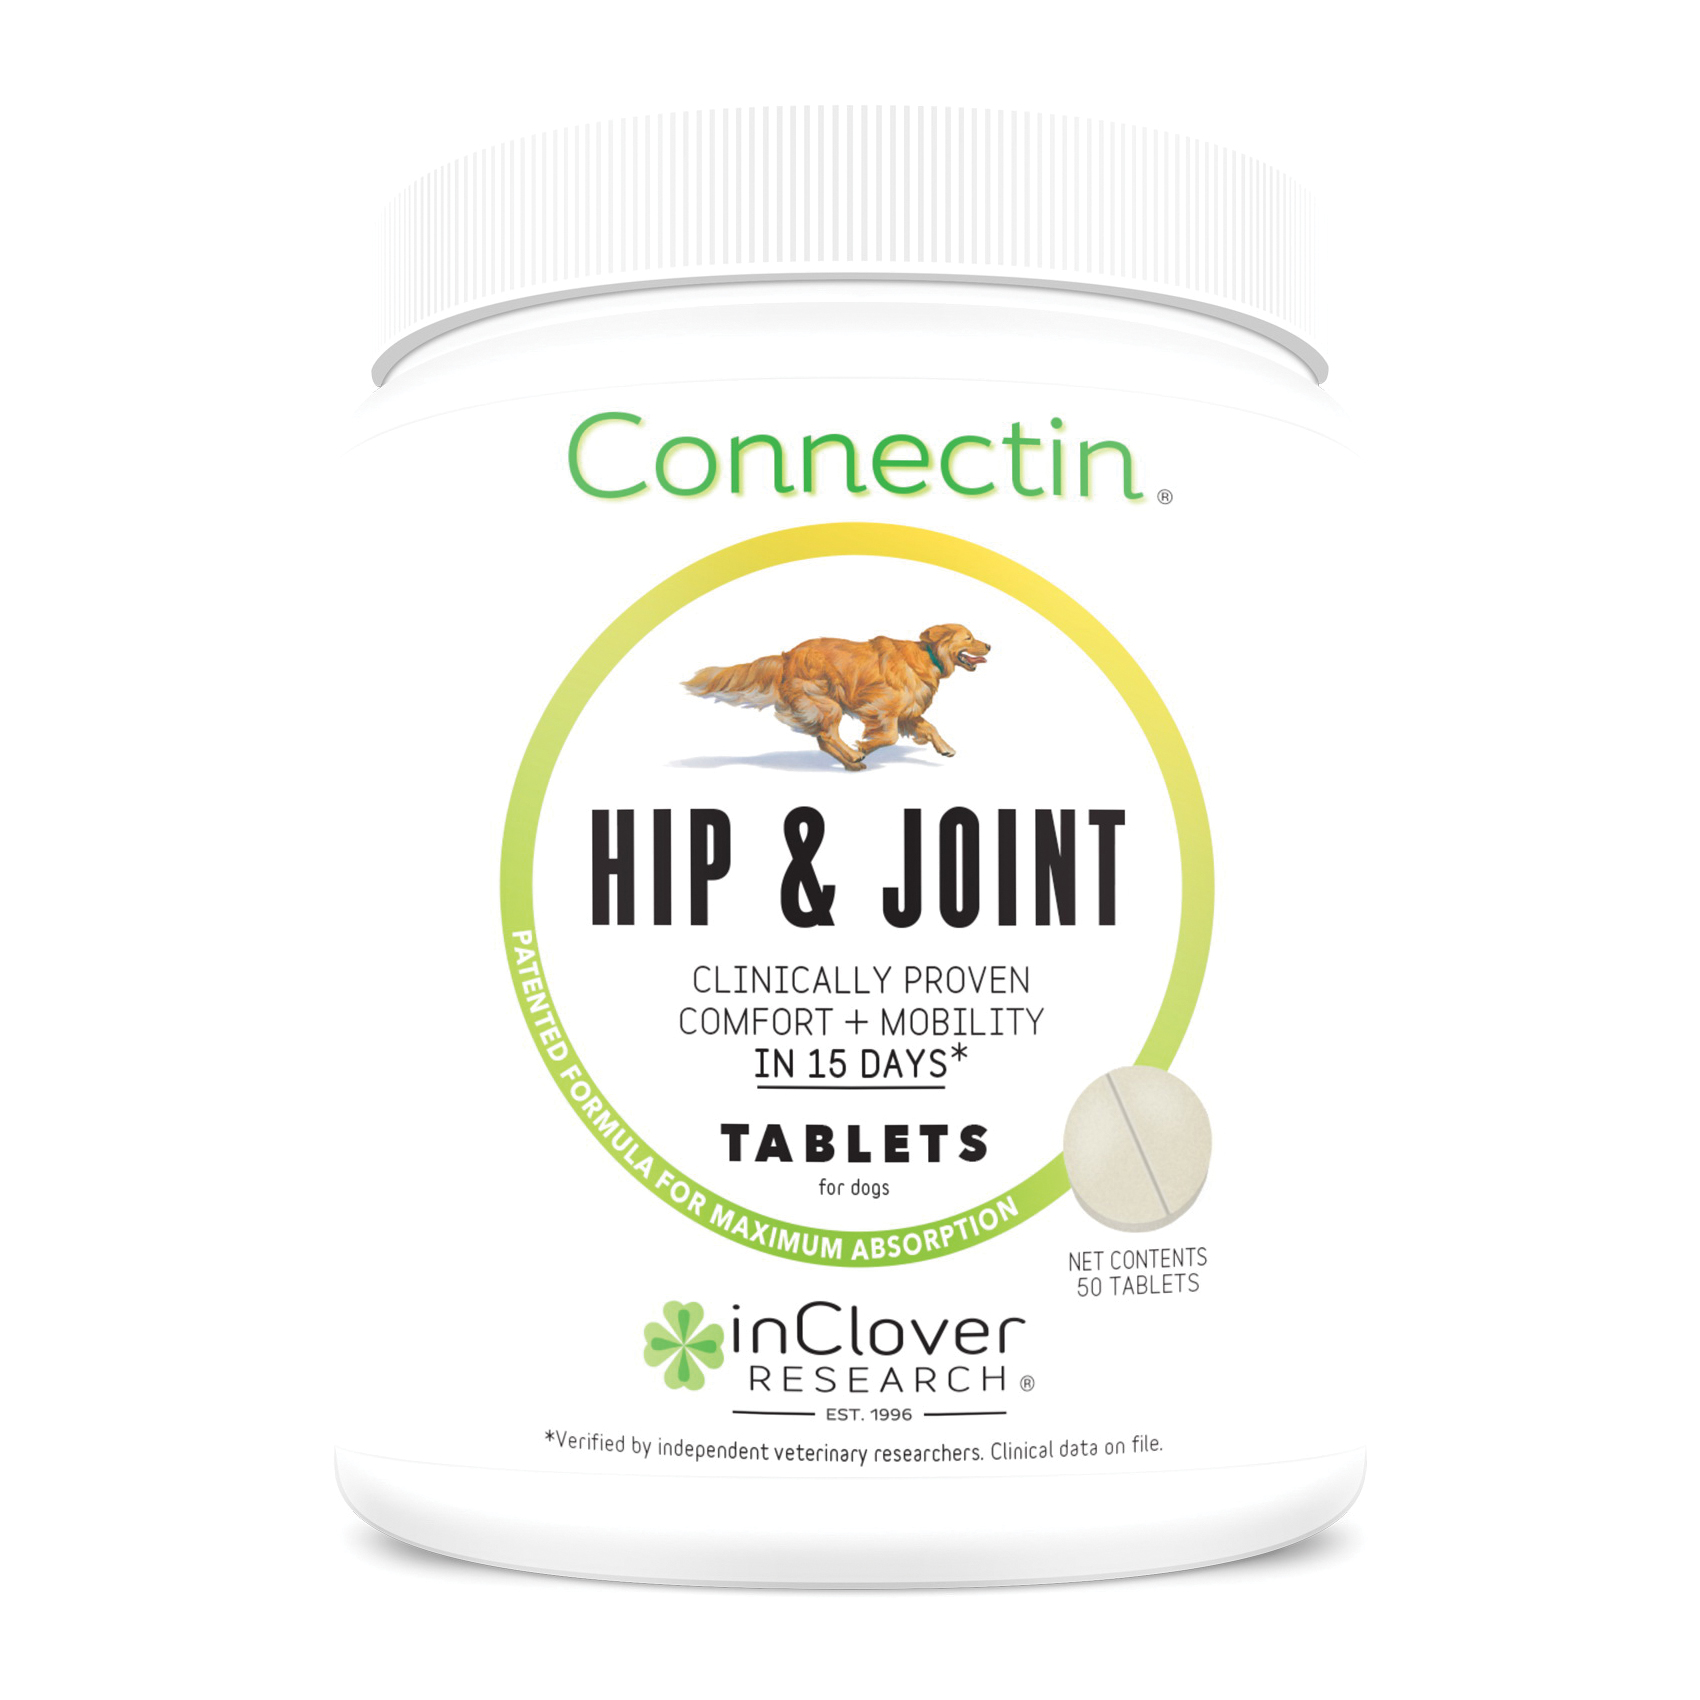 inClover RESEARCH T050 Canine Connectin' Crunchy Tablet, Pork Flavor Bottle - 1